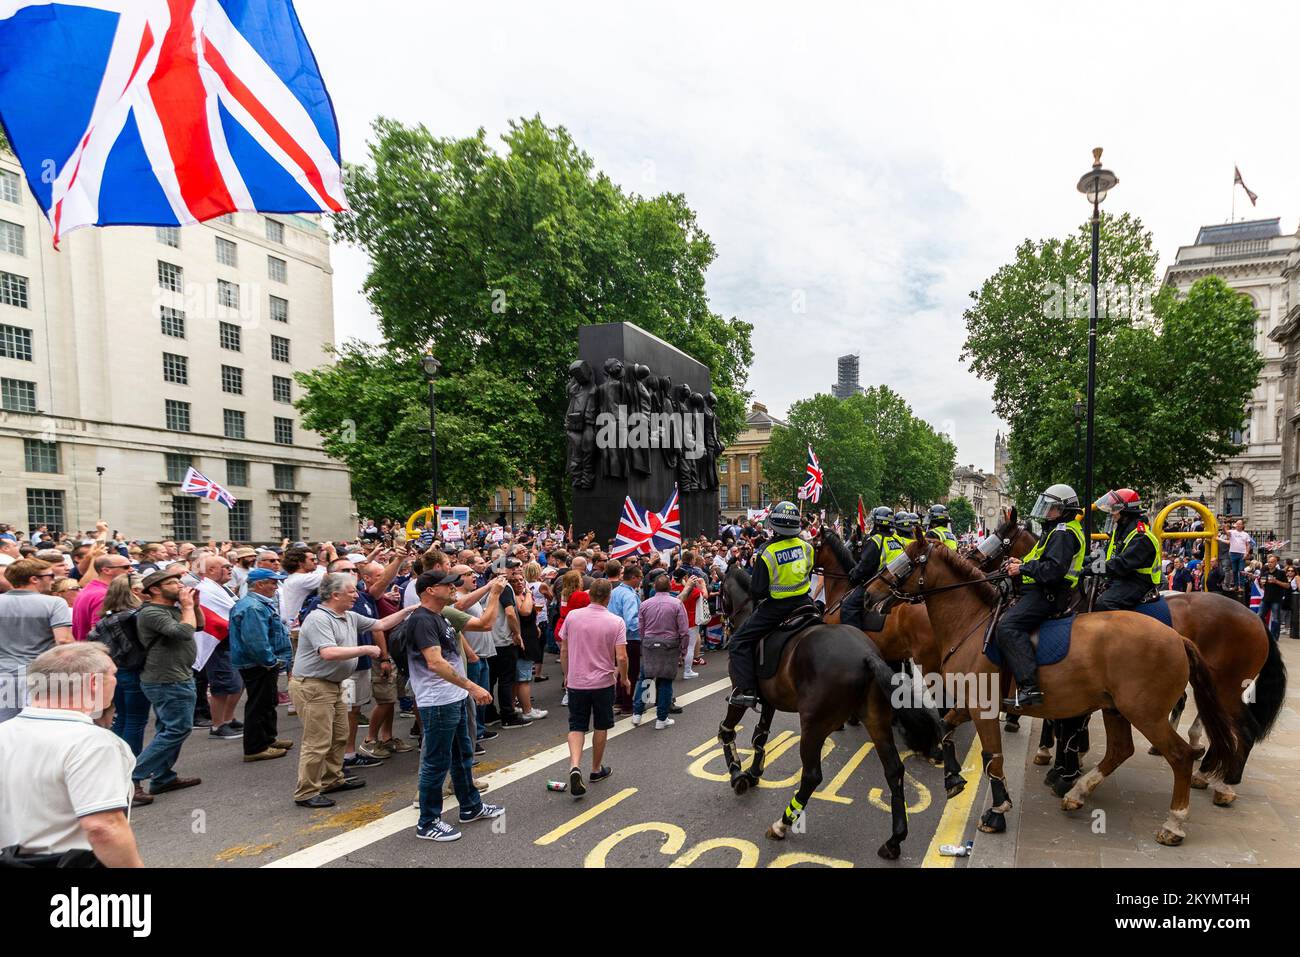 Supporters of Tommy Robinson, such as the EDL, protested in London demonstrating for his release after arrest. Mounted police in Whitehall policing Stock Photo